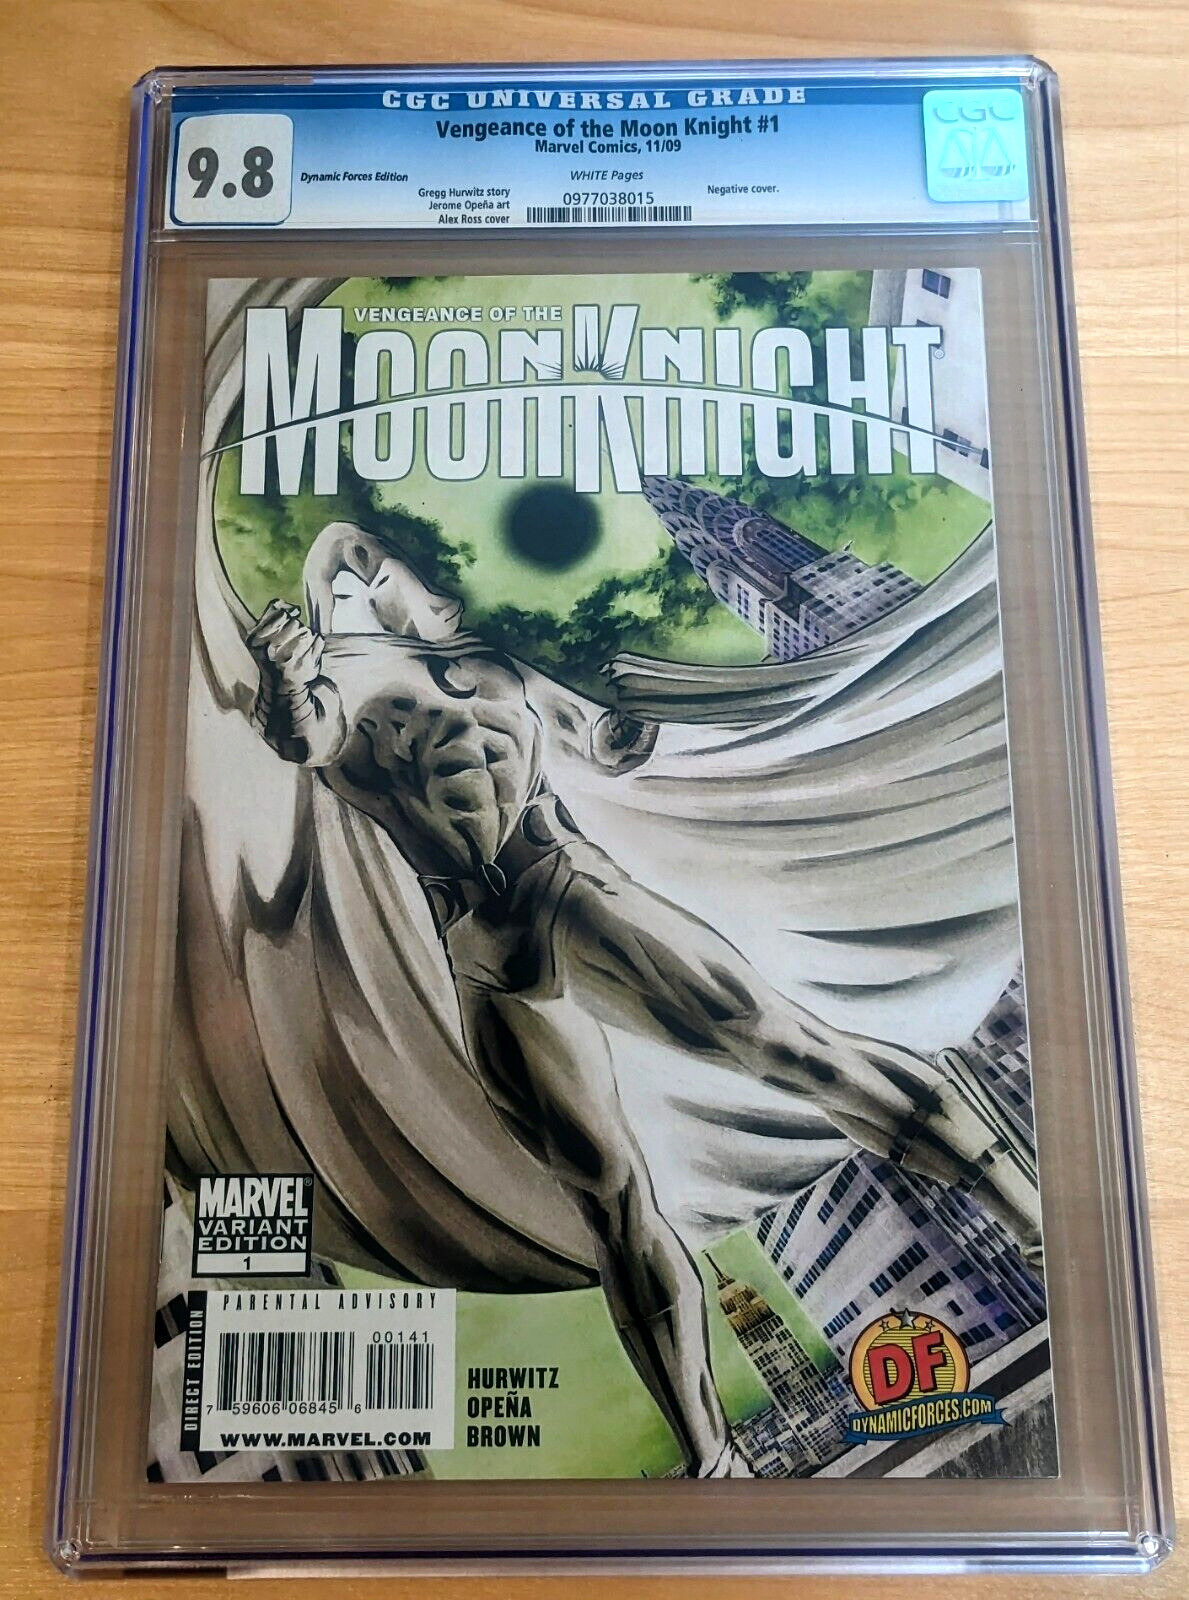 VENGEANCE OF THE MOON KNIGHT #1 CGC 9.8 ALEX ROSS DYNAMIC FORCES EDITION (2009)